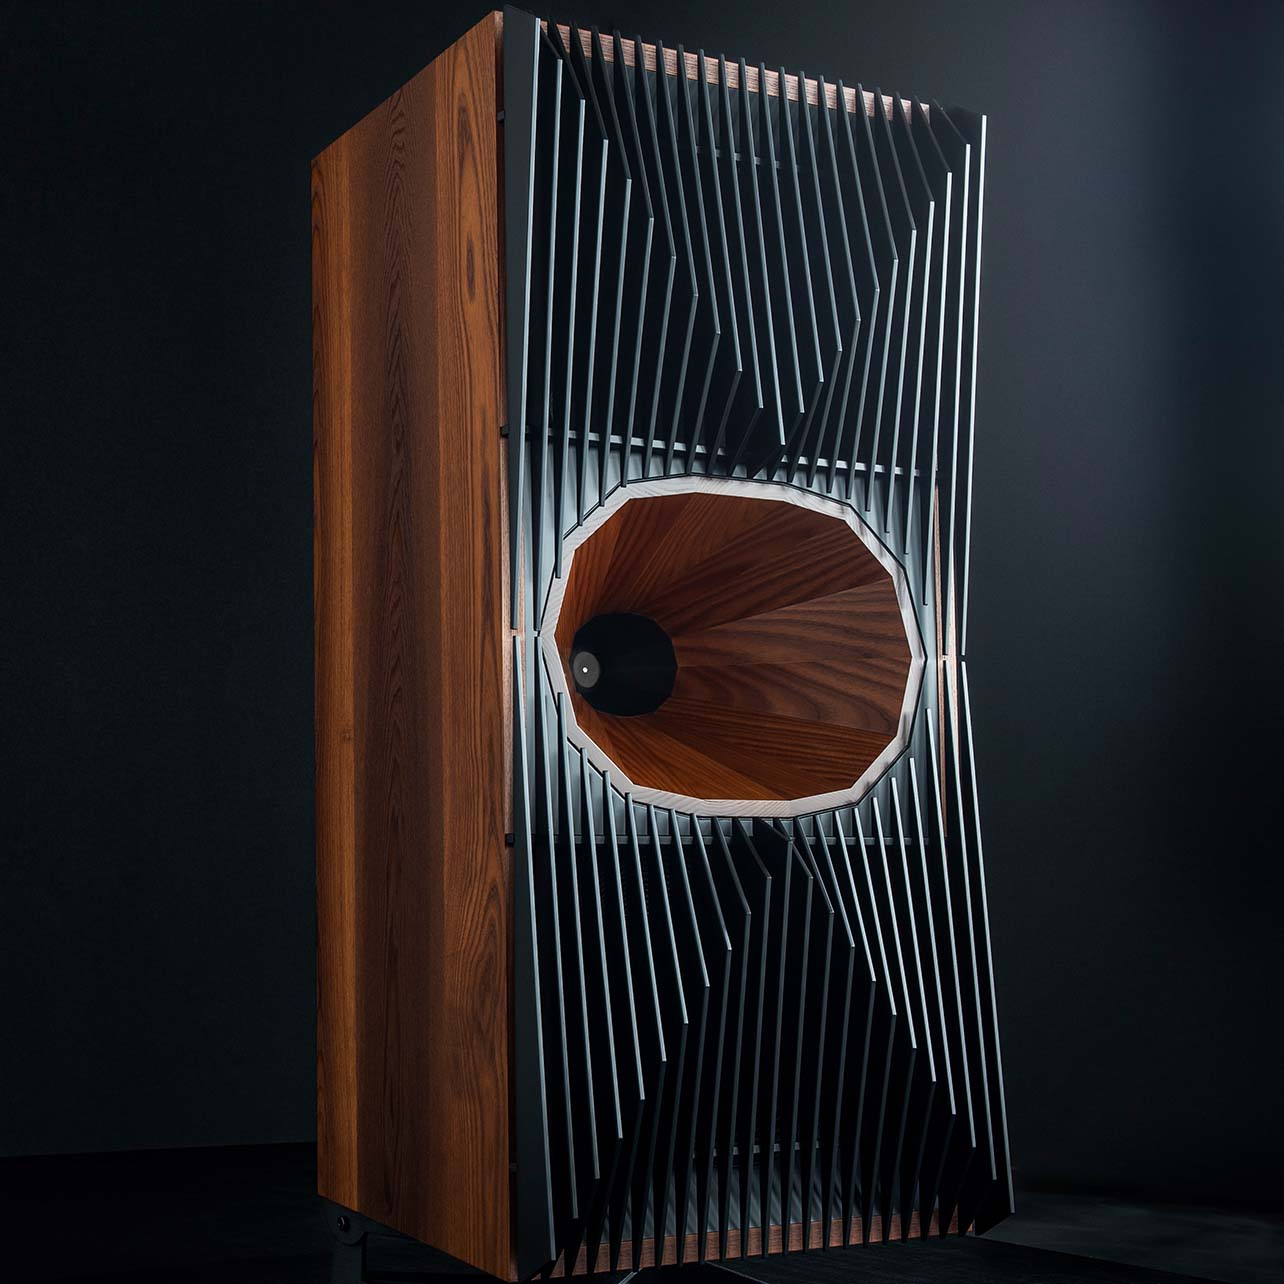 Large speaker from Oswalds Mill Audio